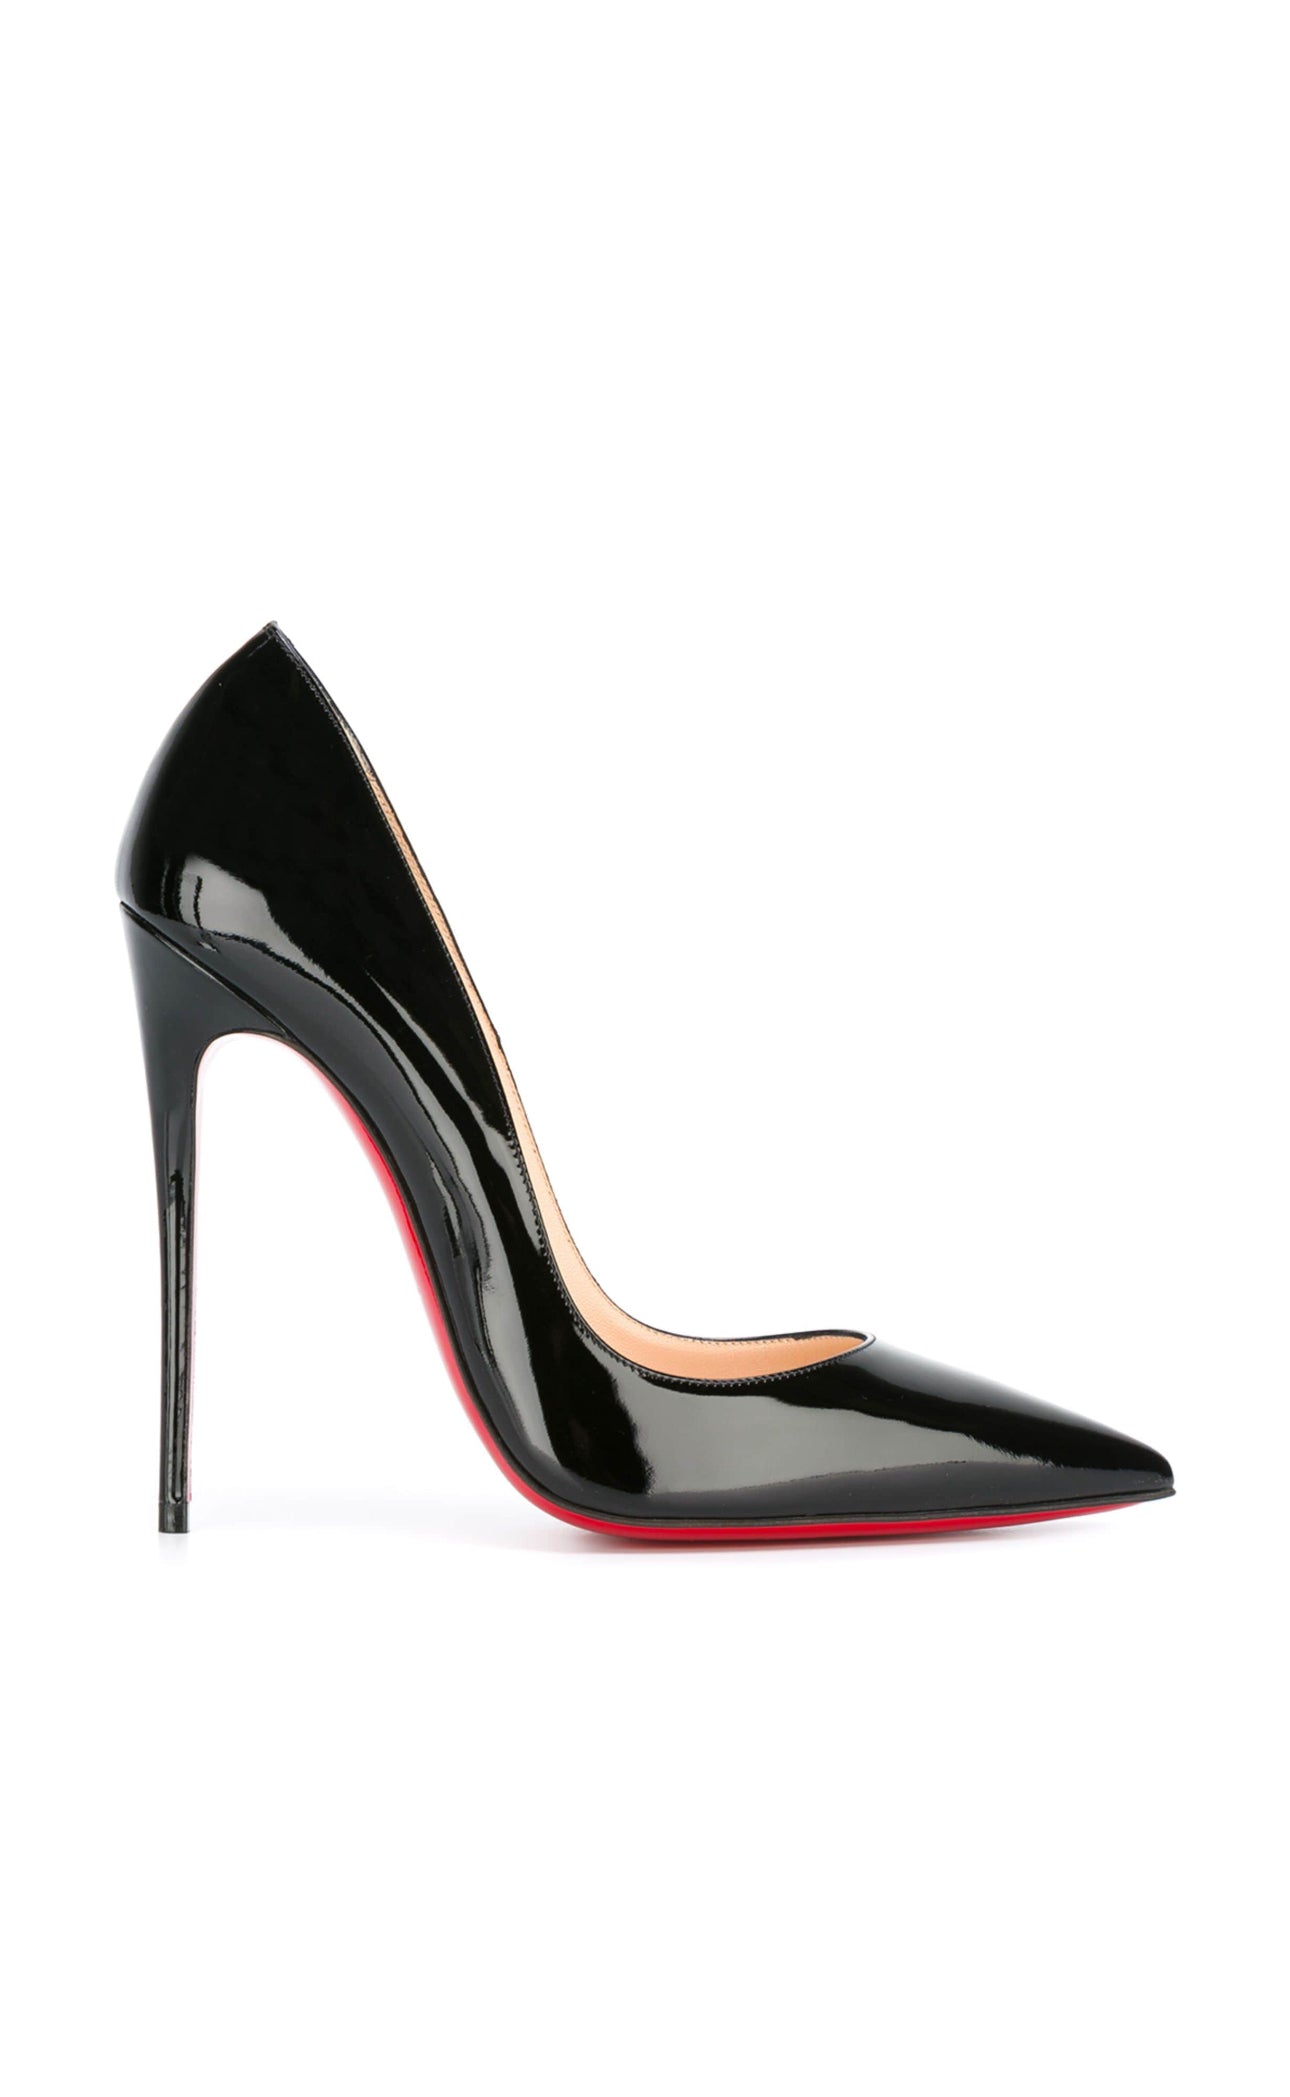 Christian Louboutin -So Kate - 120mm pointed toe stiletto shoes for rent